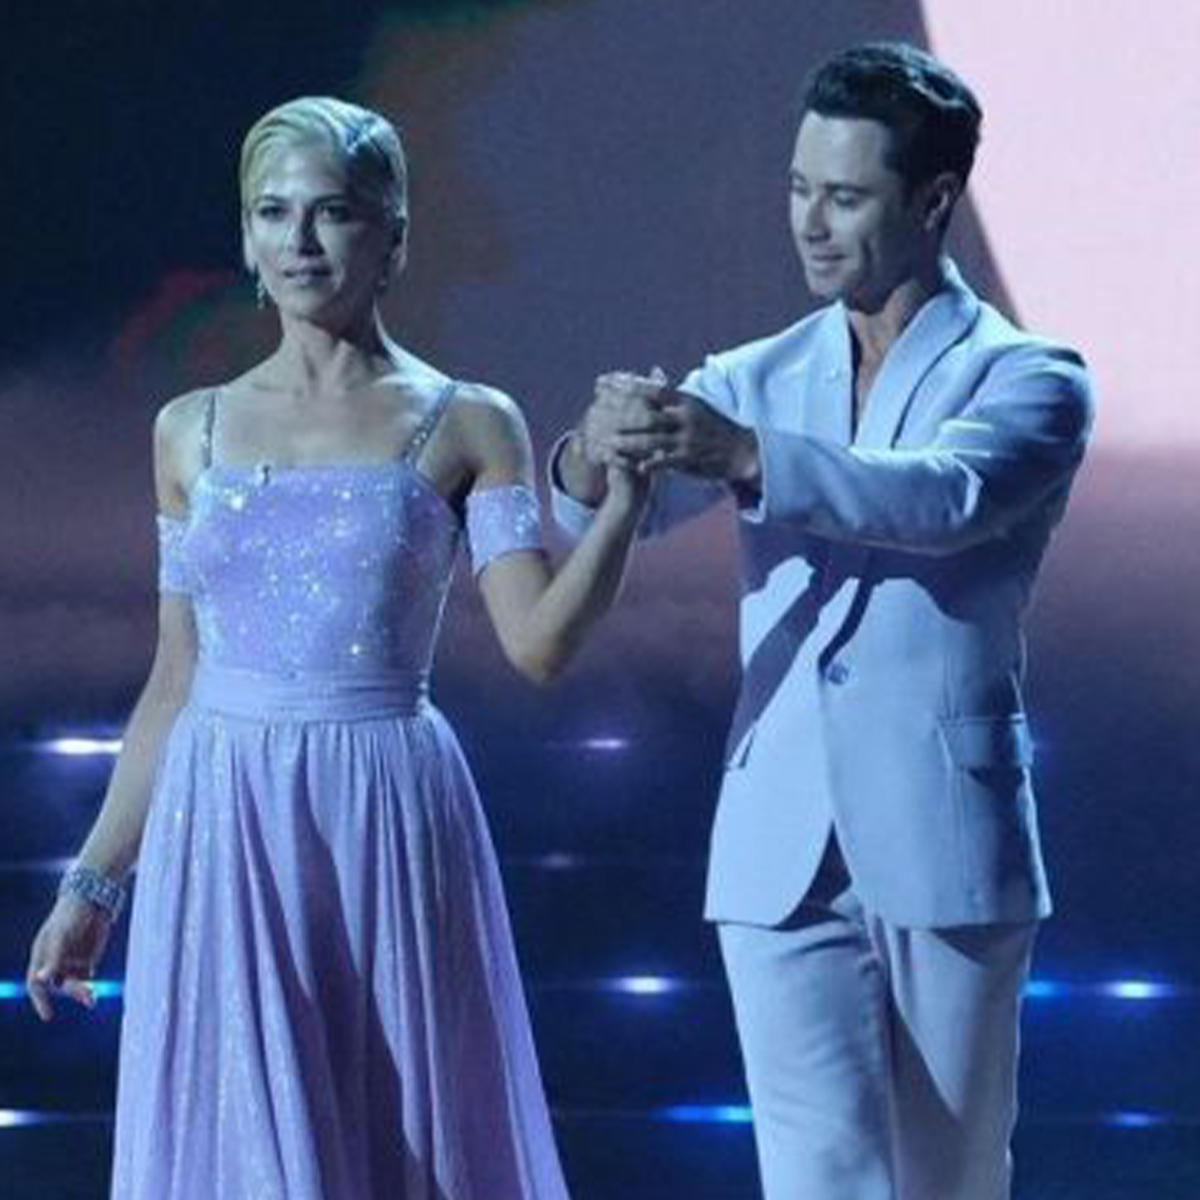 Selma Blair Thanks Dancing With the Stars for Giving Her a "Sense of Self" After Shocking Exit